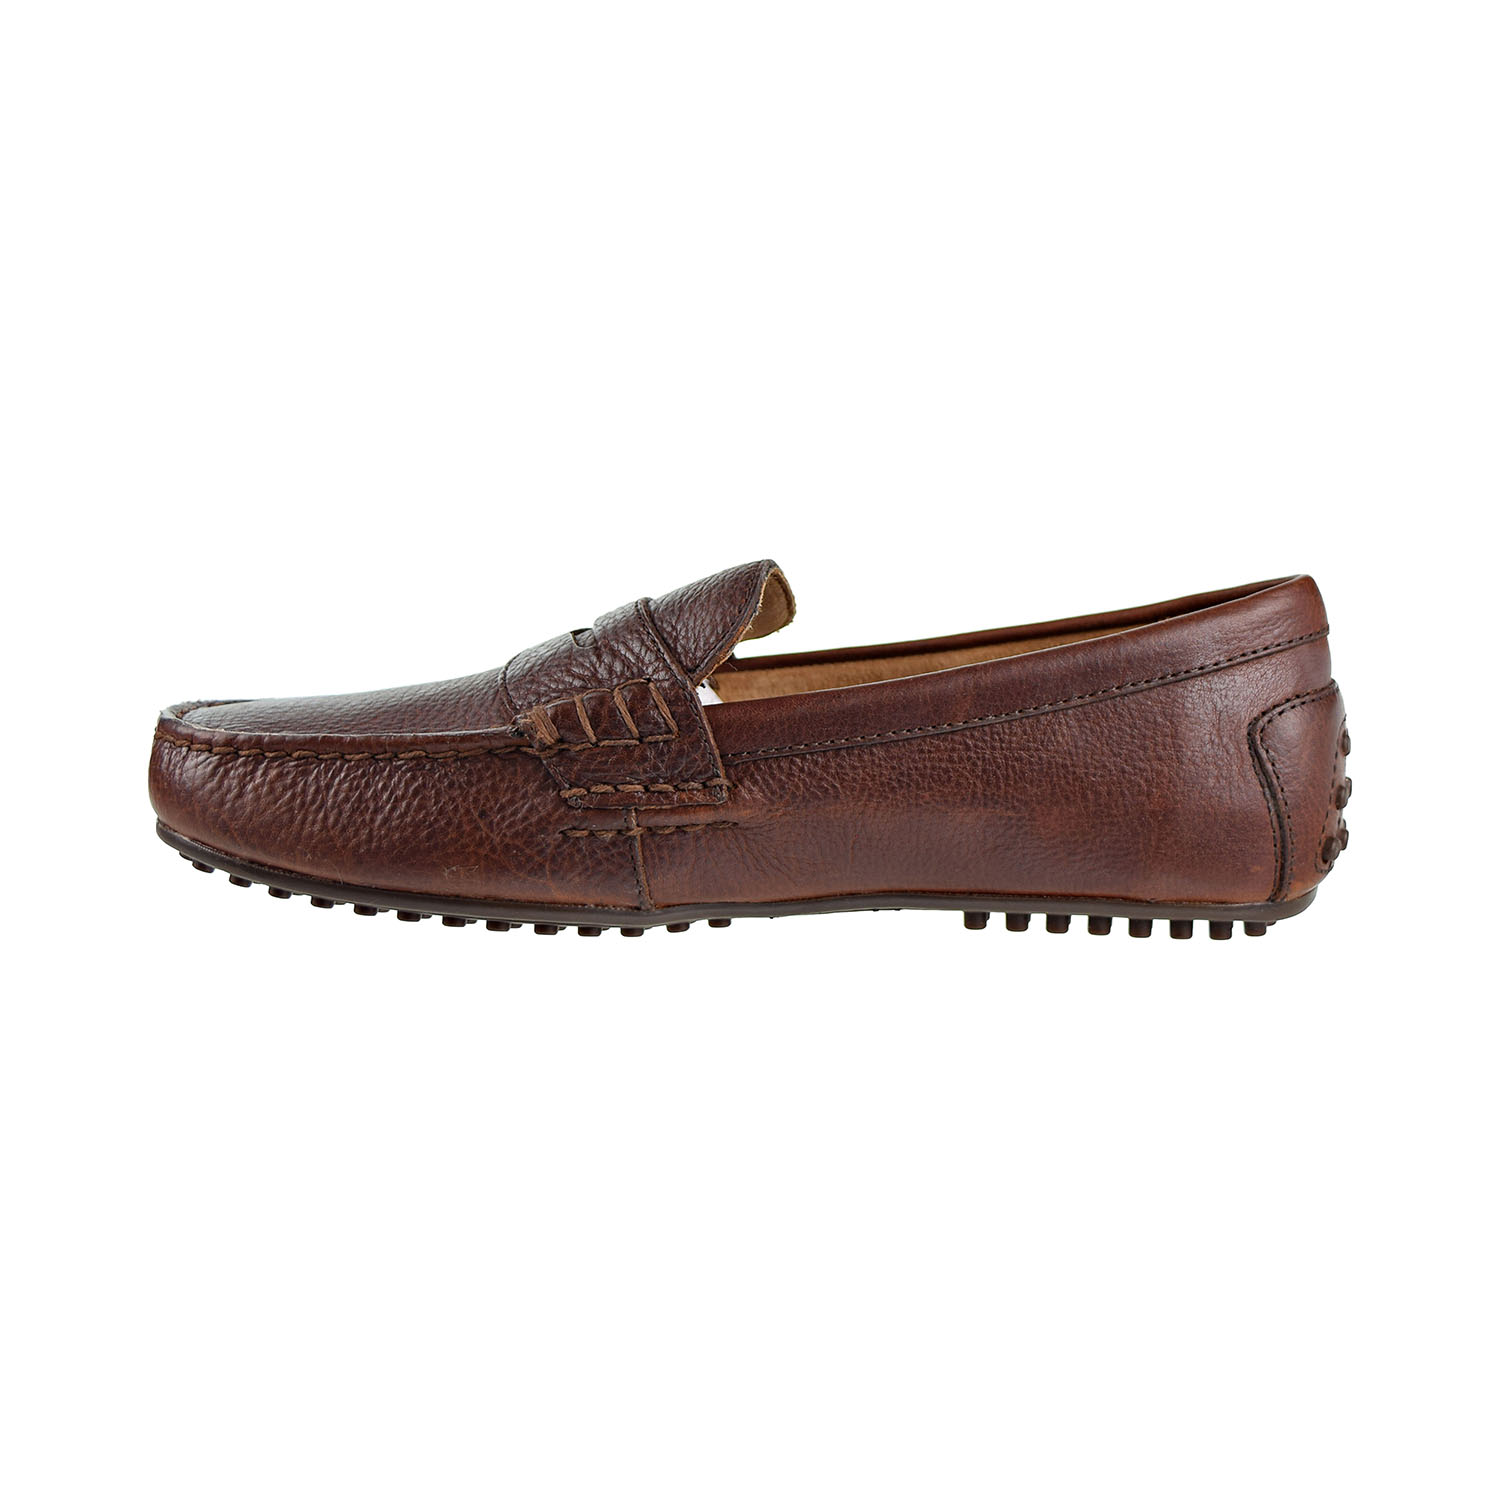 polo ralph lauren loafer shoes